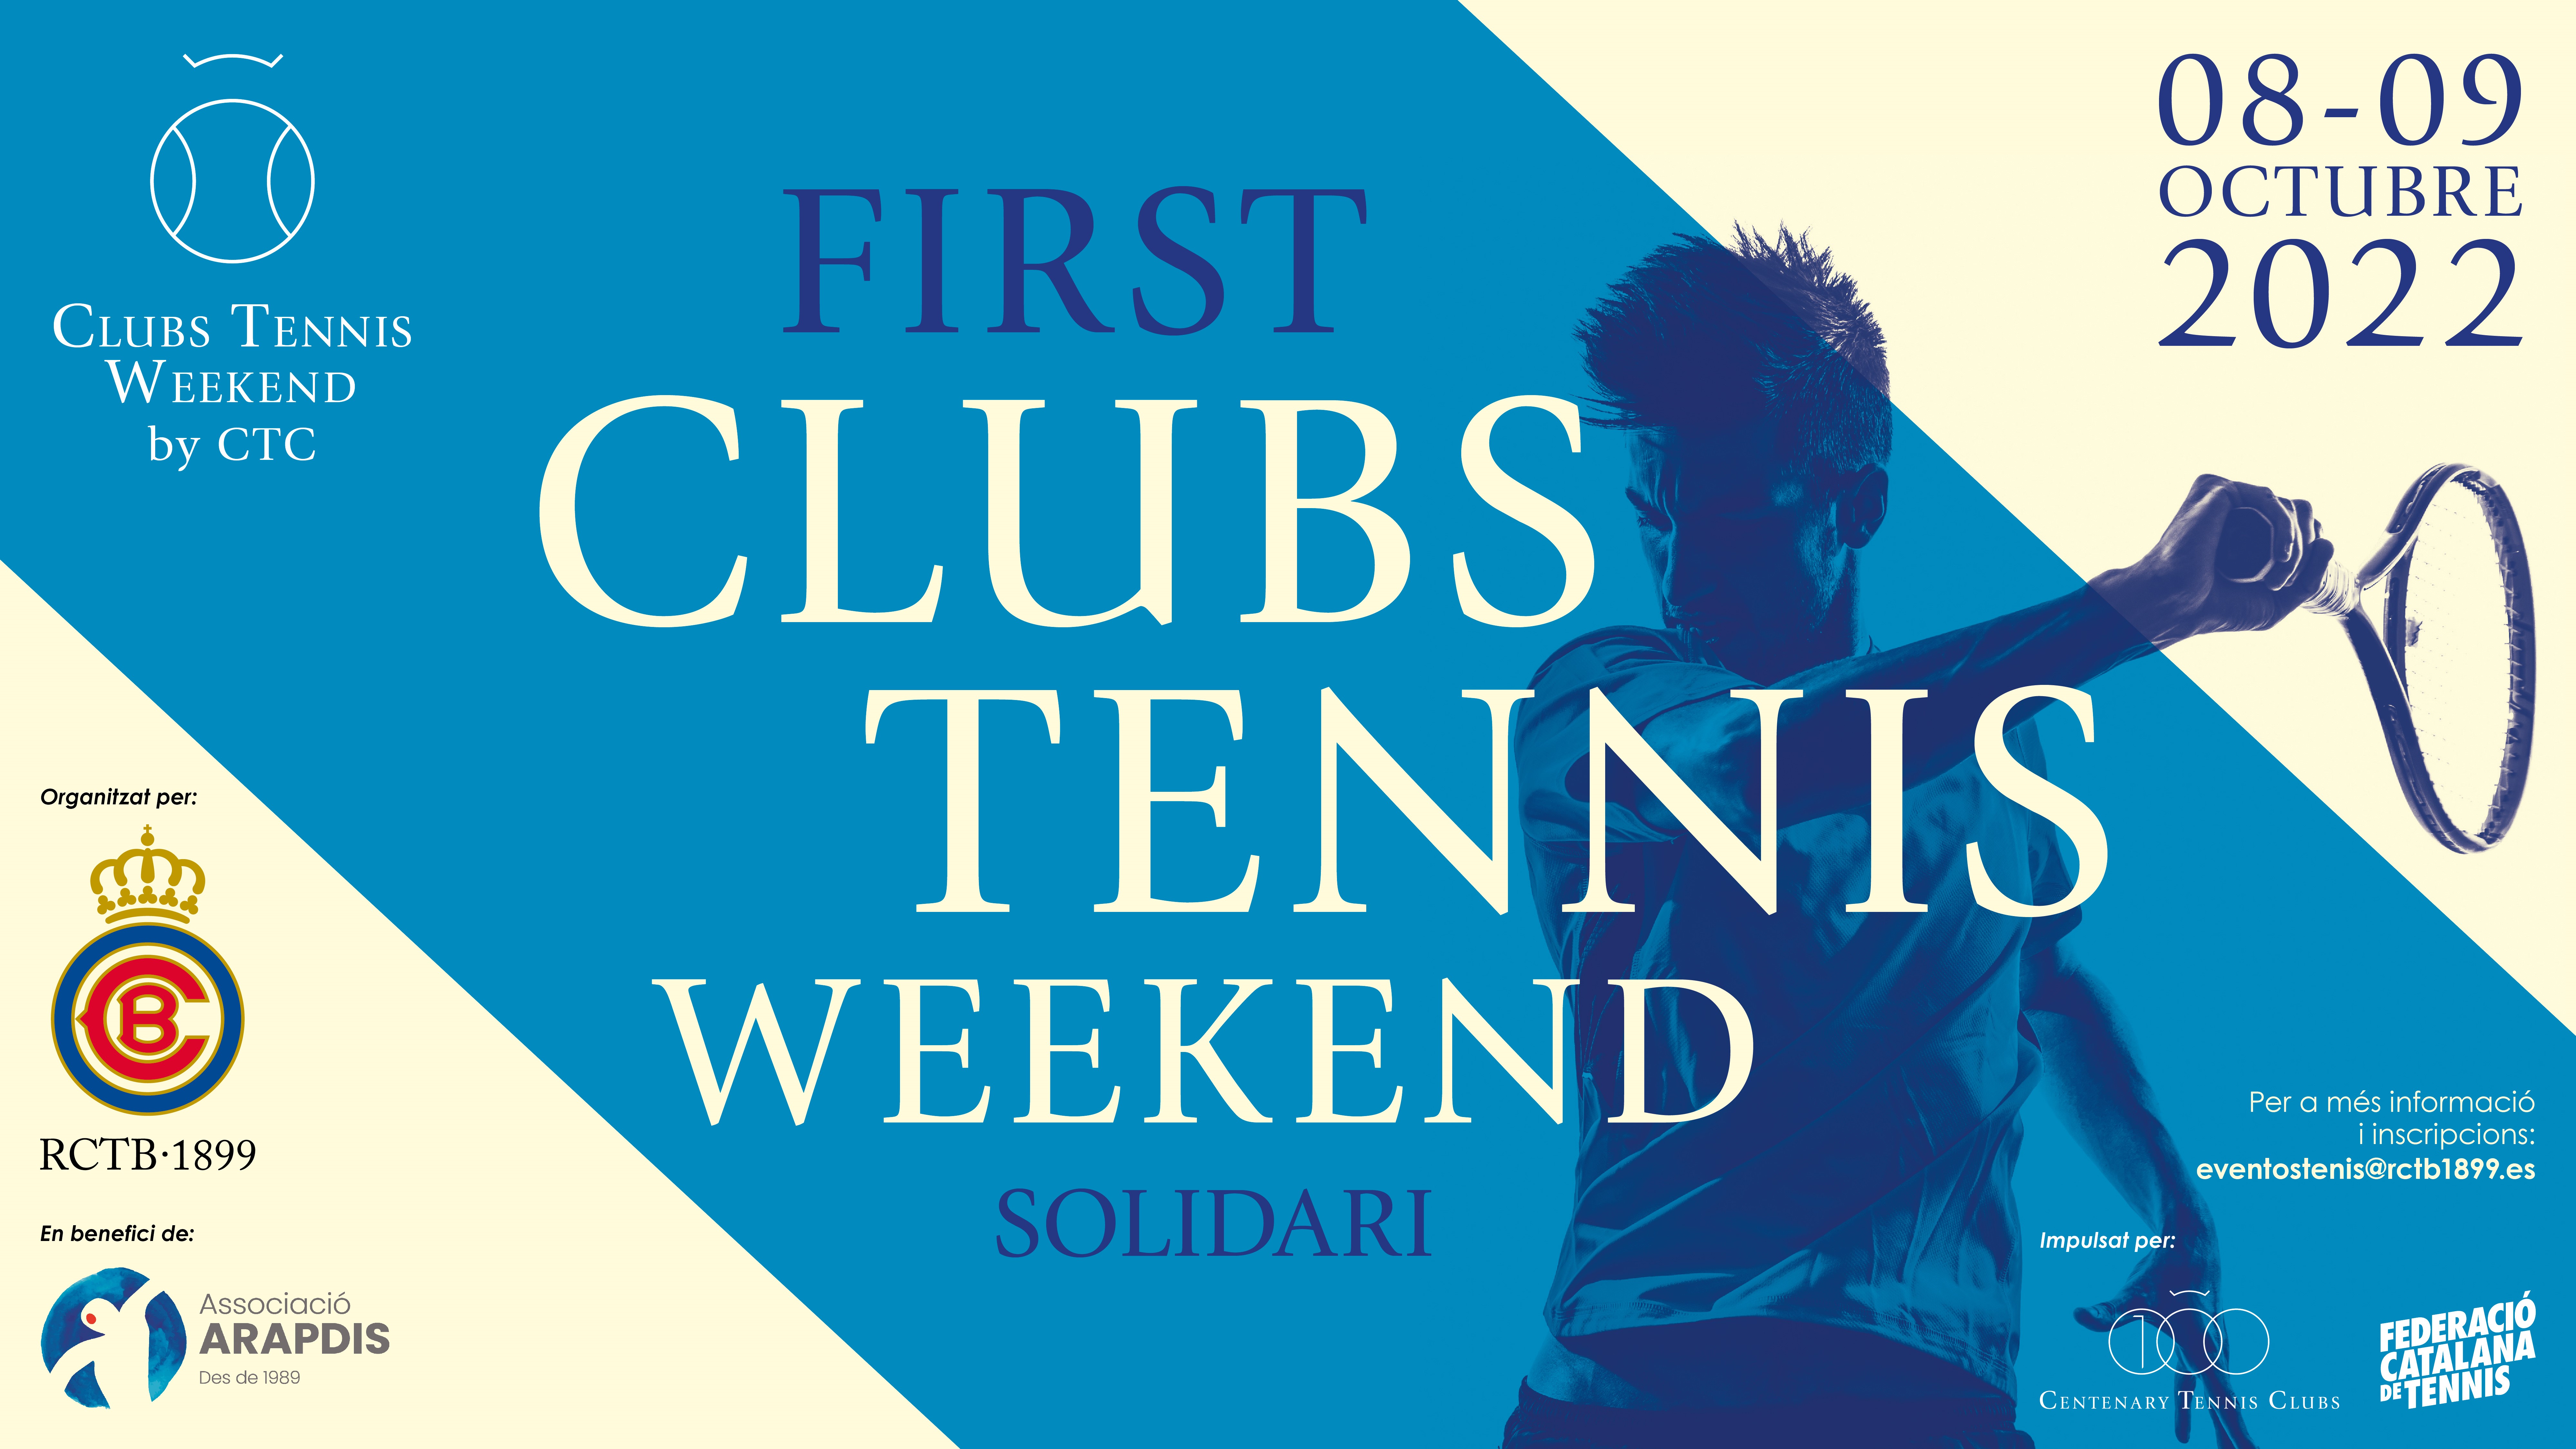 Clubs Tennis Weekend by CTC